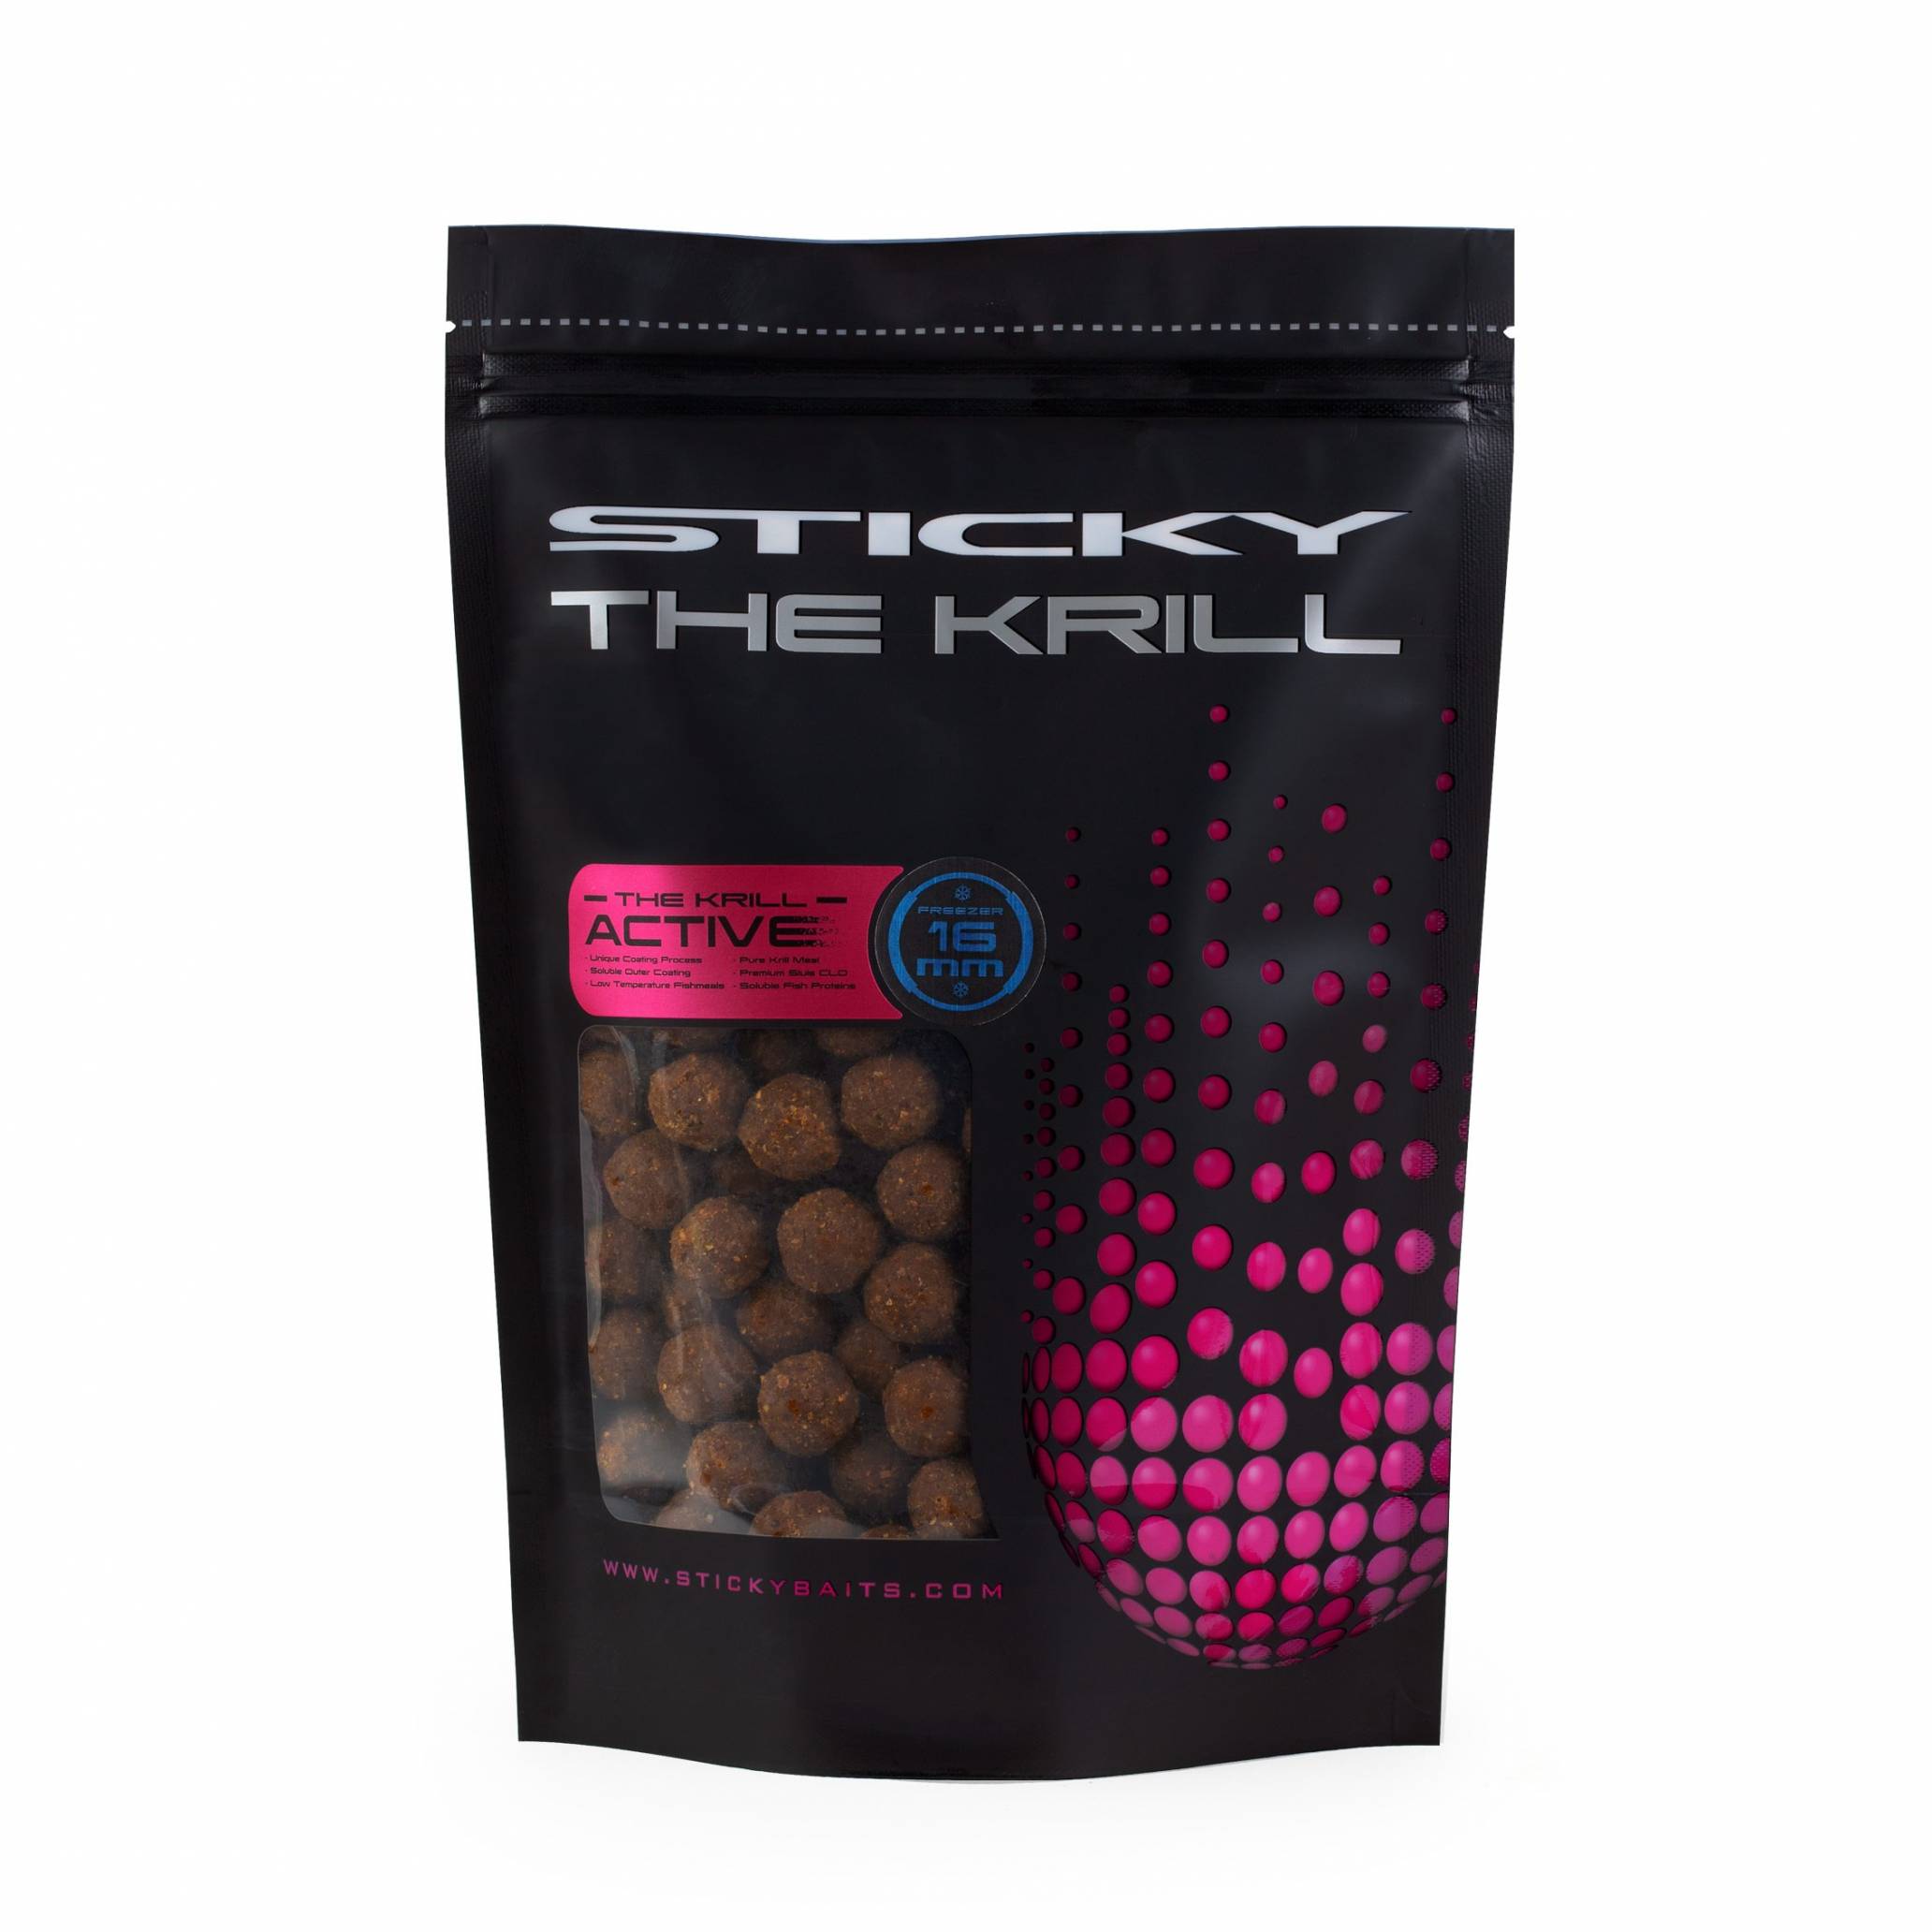 Products - The Krill Powder - Carp Fishing Bait - Sticky Baits